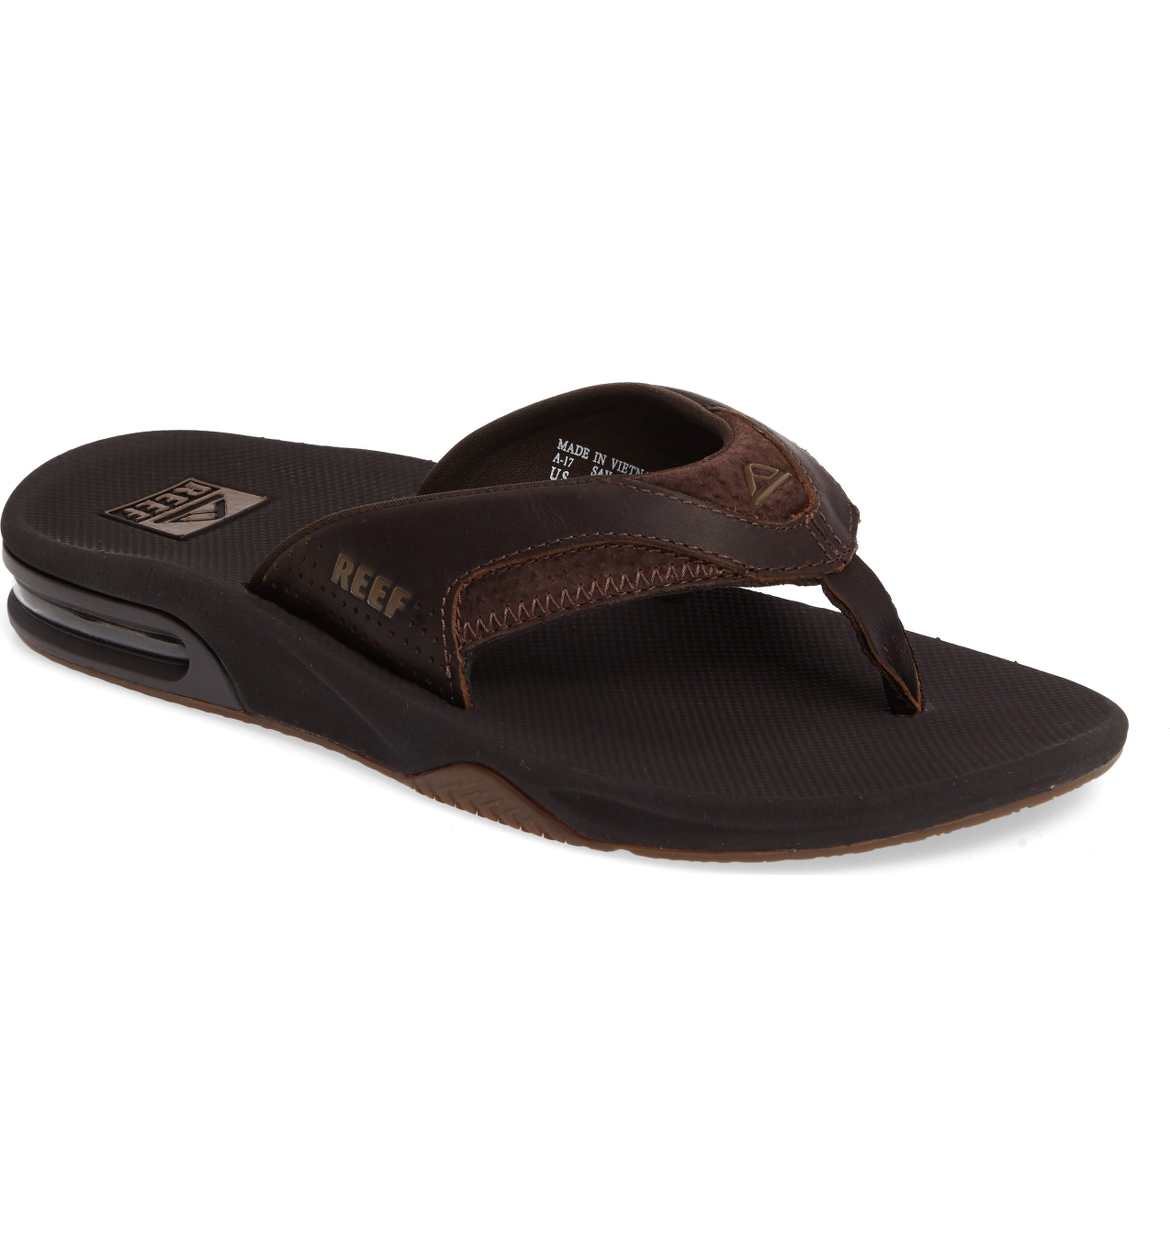 reef sandals with arch support